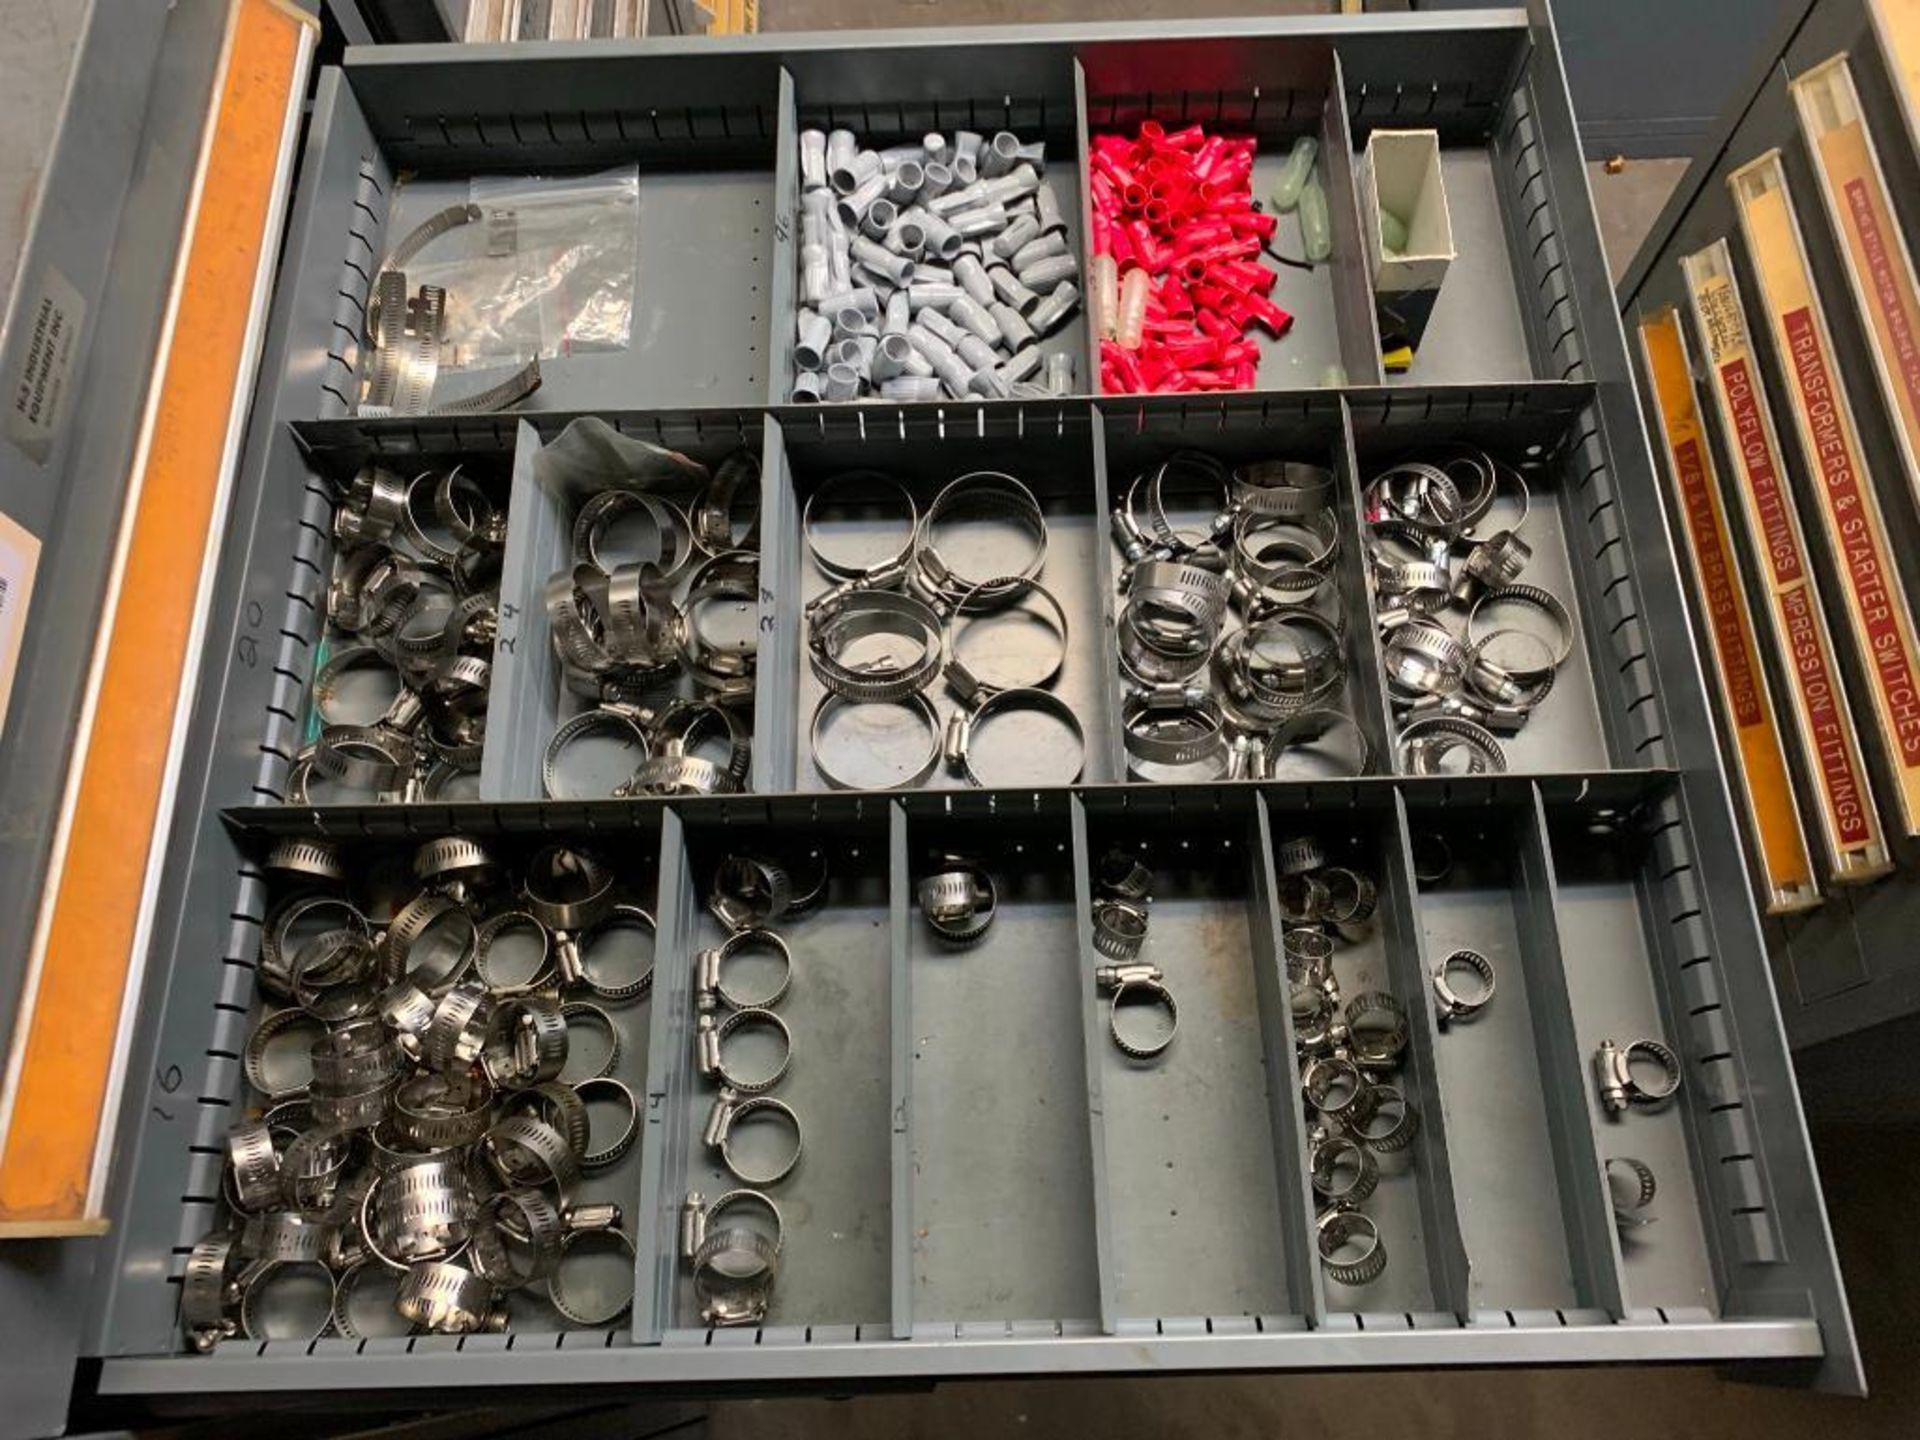 Vidmar 7 Drawer Cabinet with Hose Clamps, Retaining Rings, Wire Nuts, Fittings, Etc. - Image 3 of 9